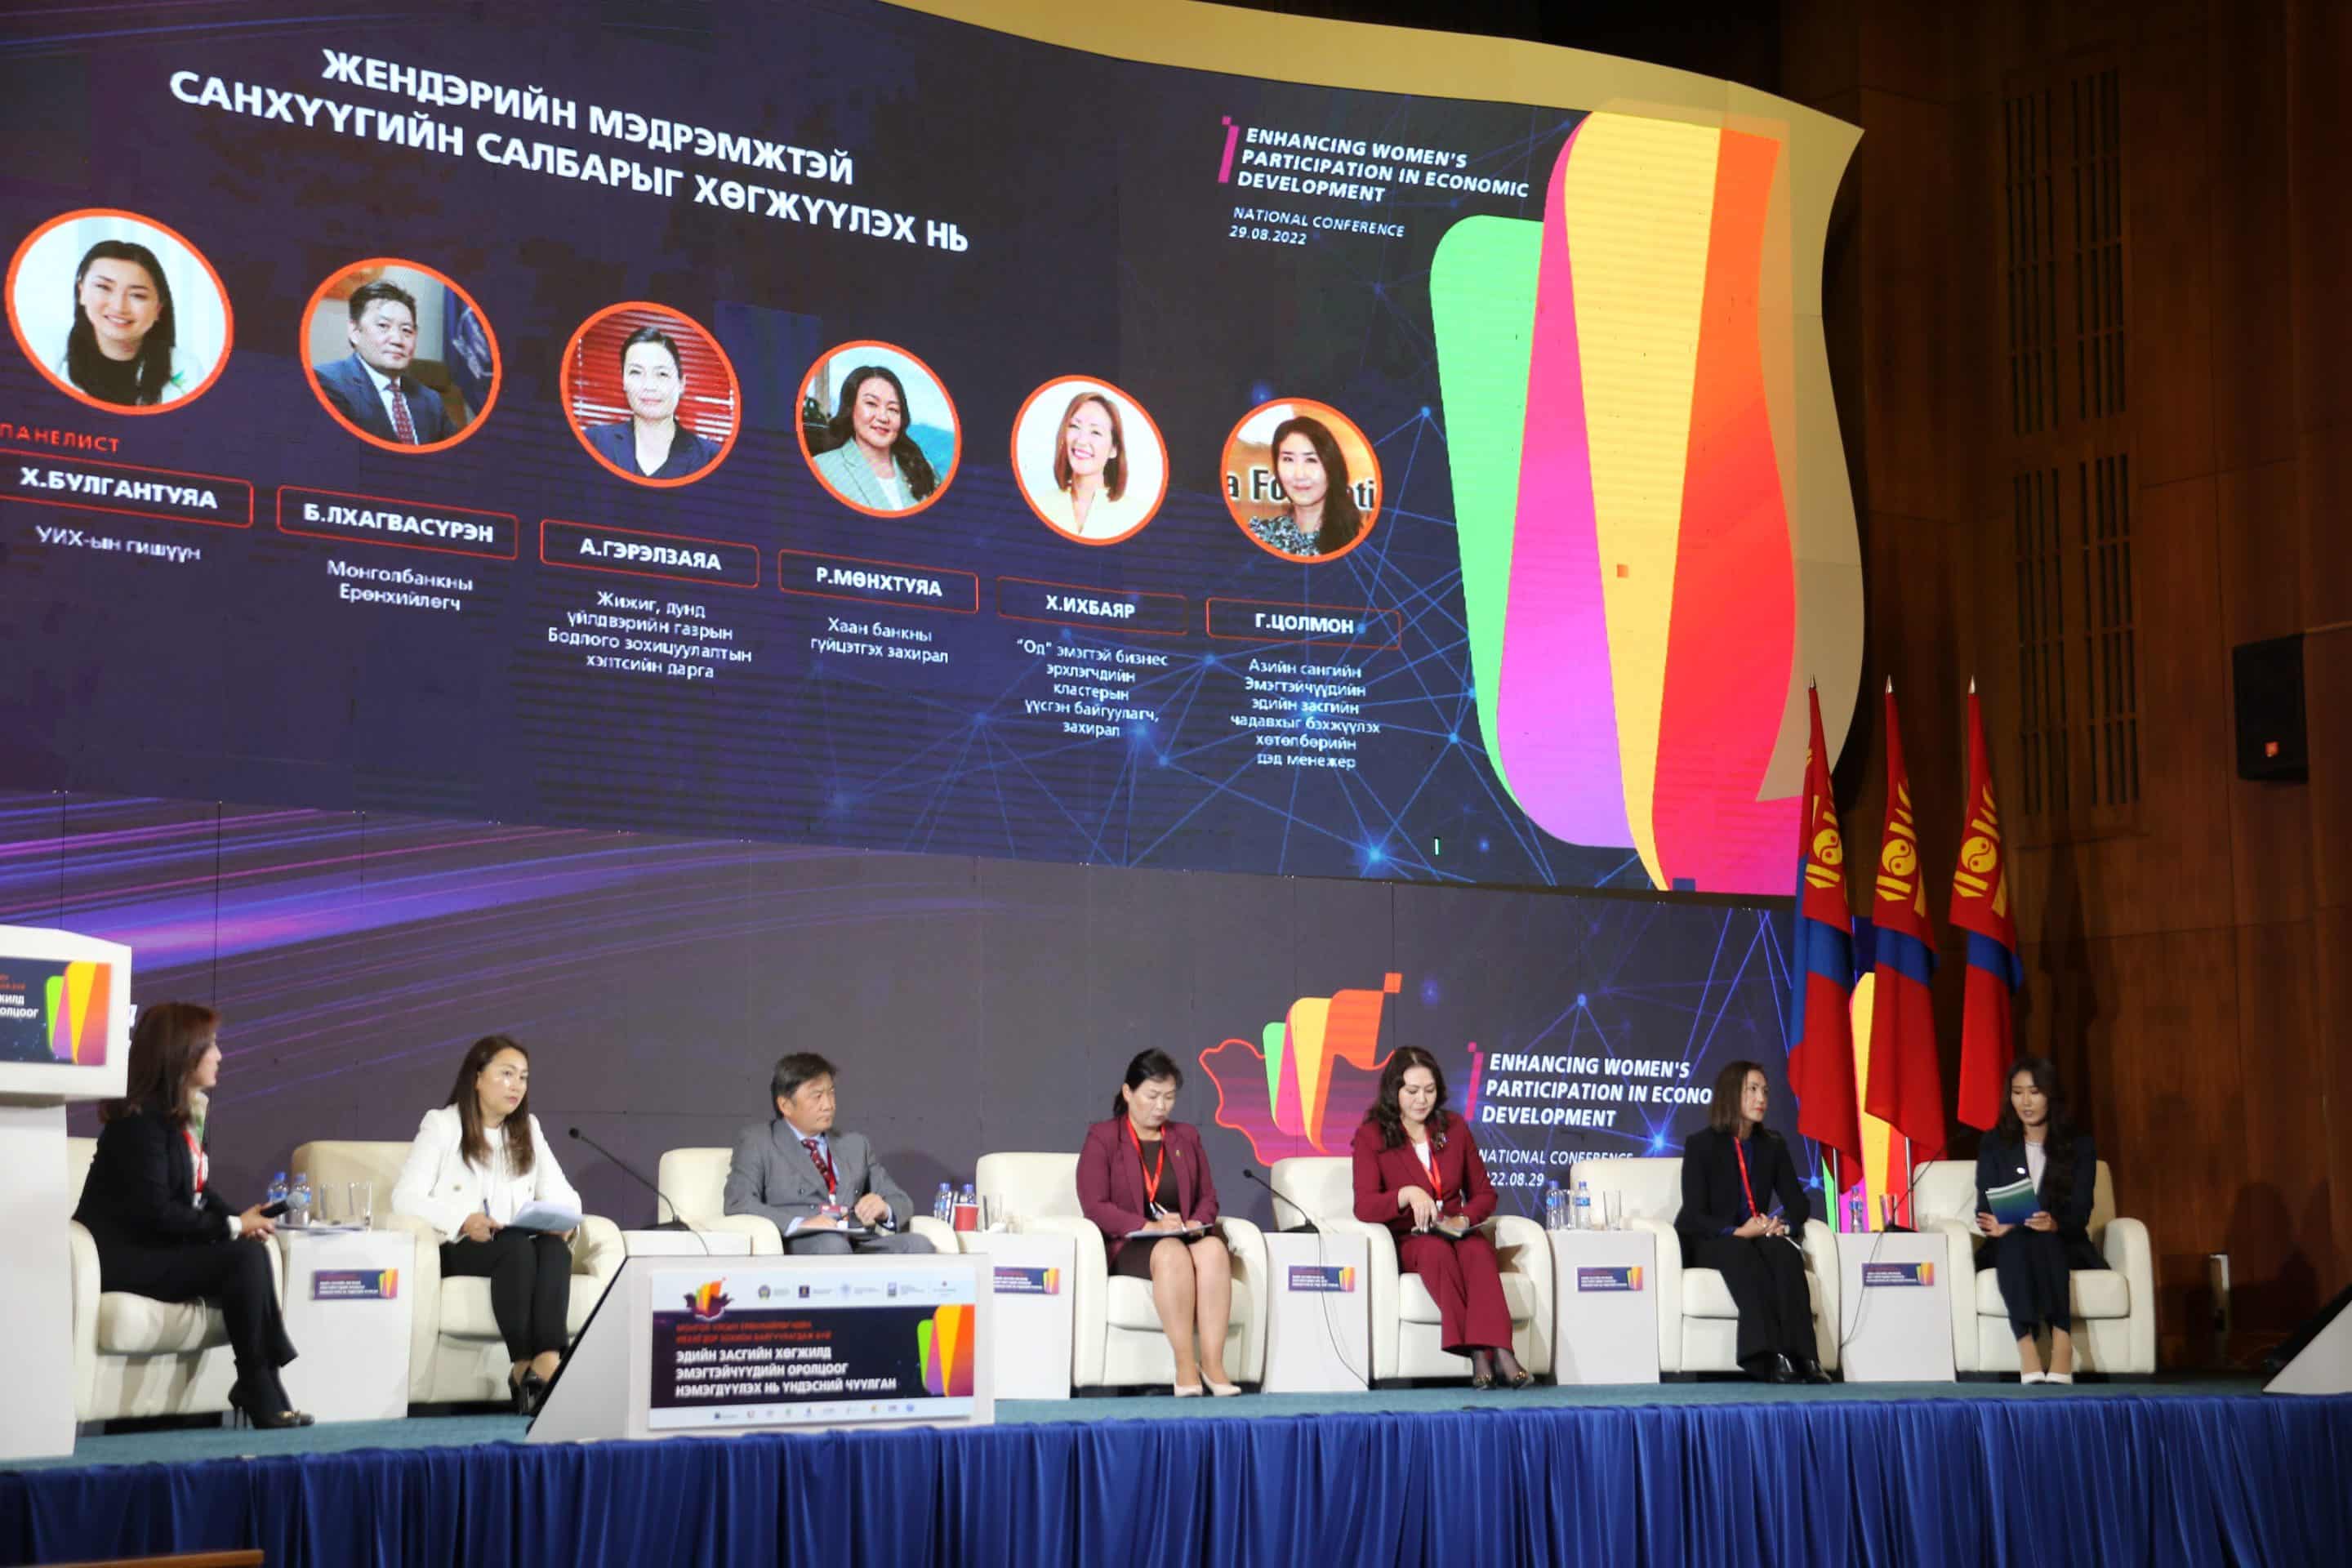 Speakers on stage at National Forum in Mongolia on Increasing Women’s Participation in the Economy 